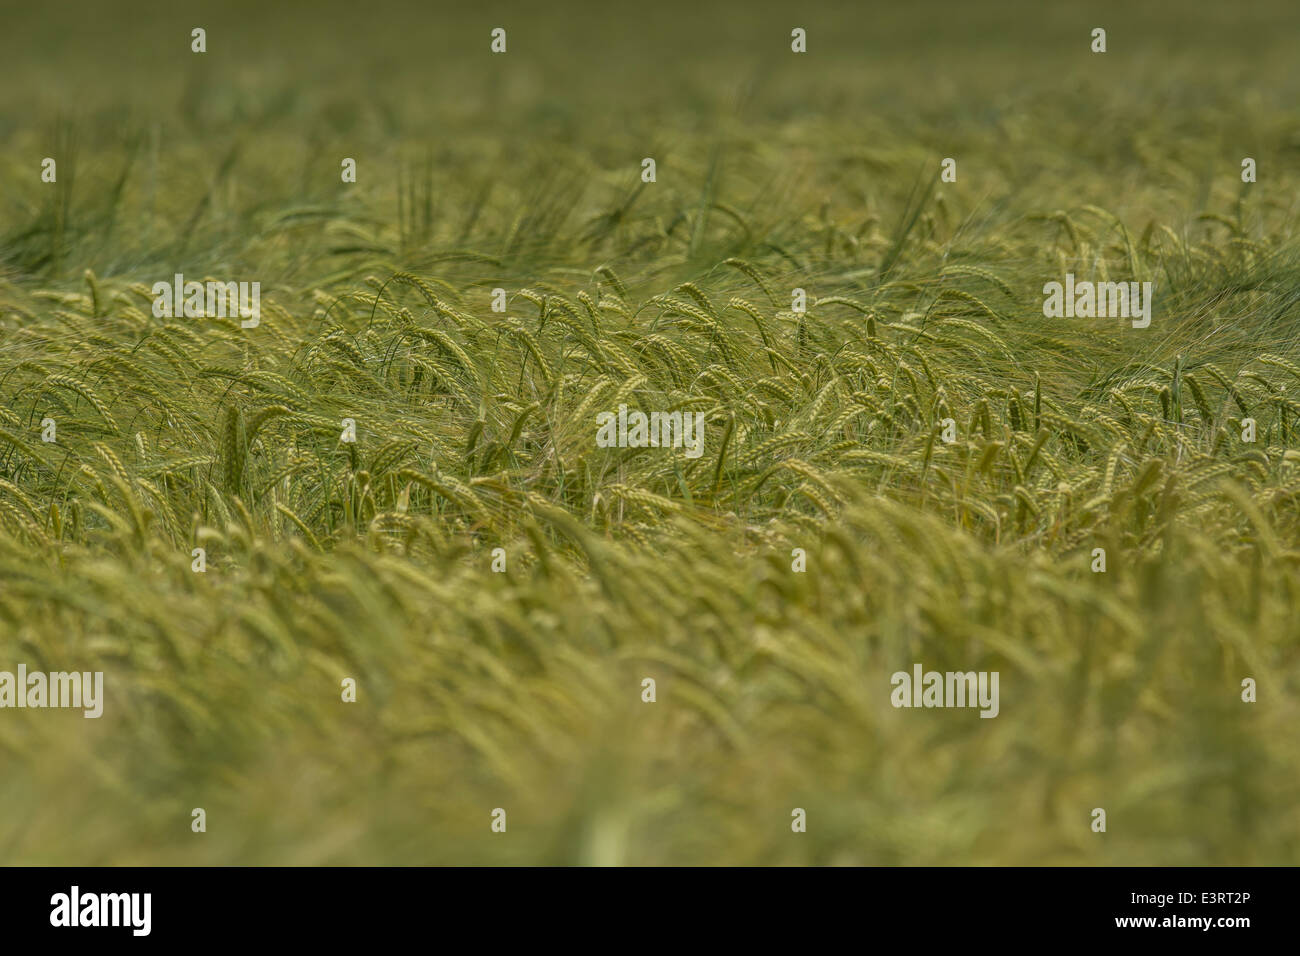 Green fields of England concept. Heads of green barley (Hordeum vulgare) growing. Visual metaphor for concept of famine, food security. Stock Photo